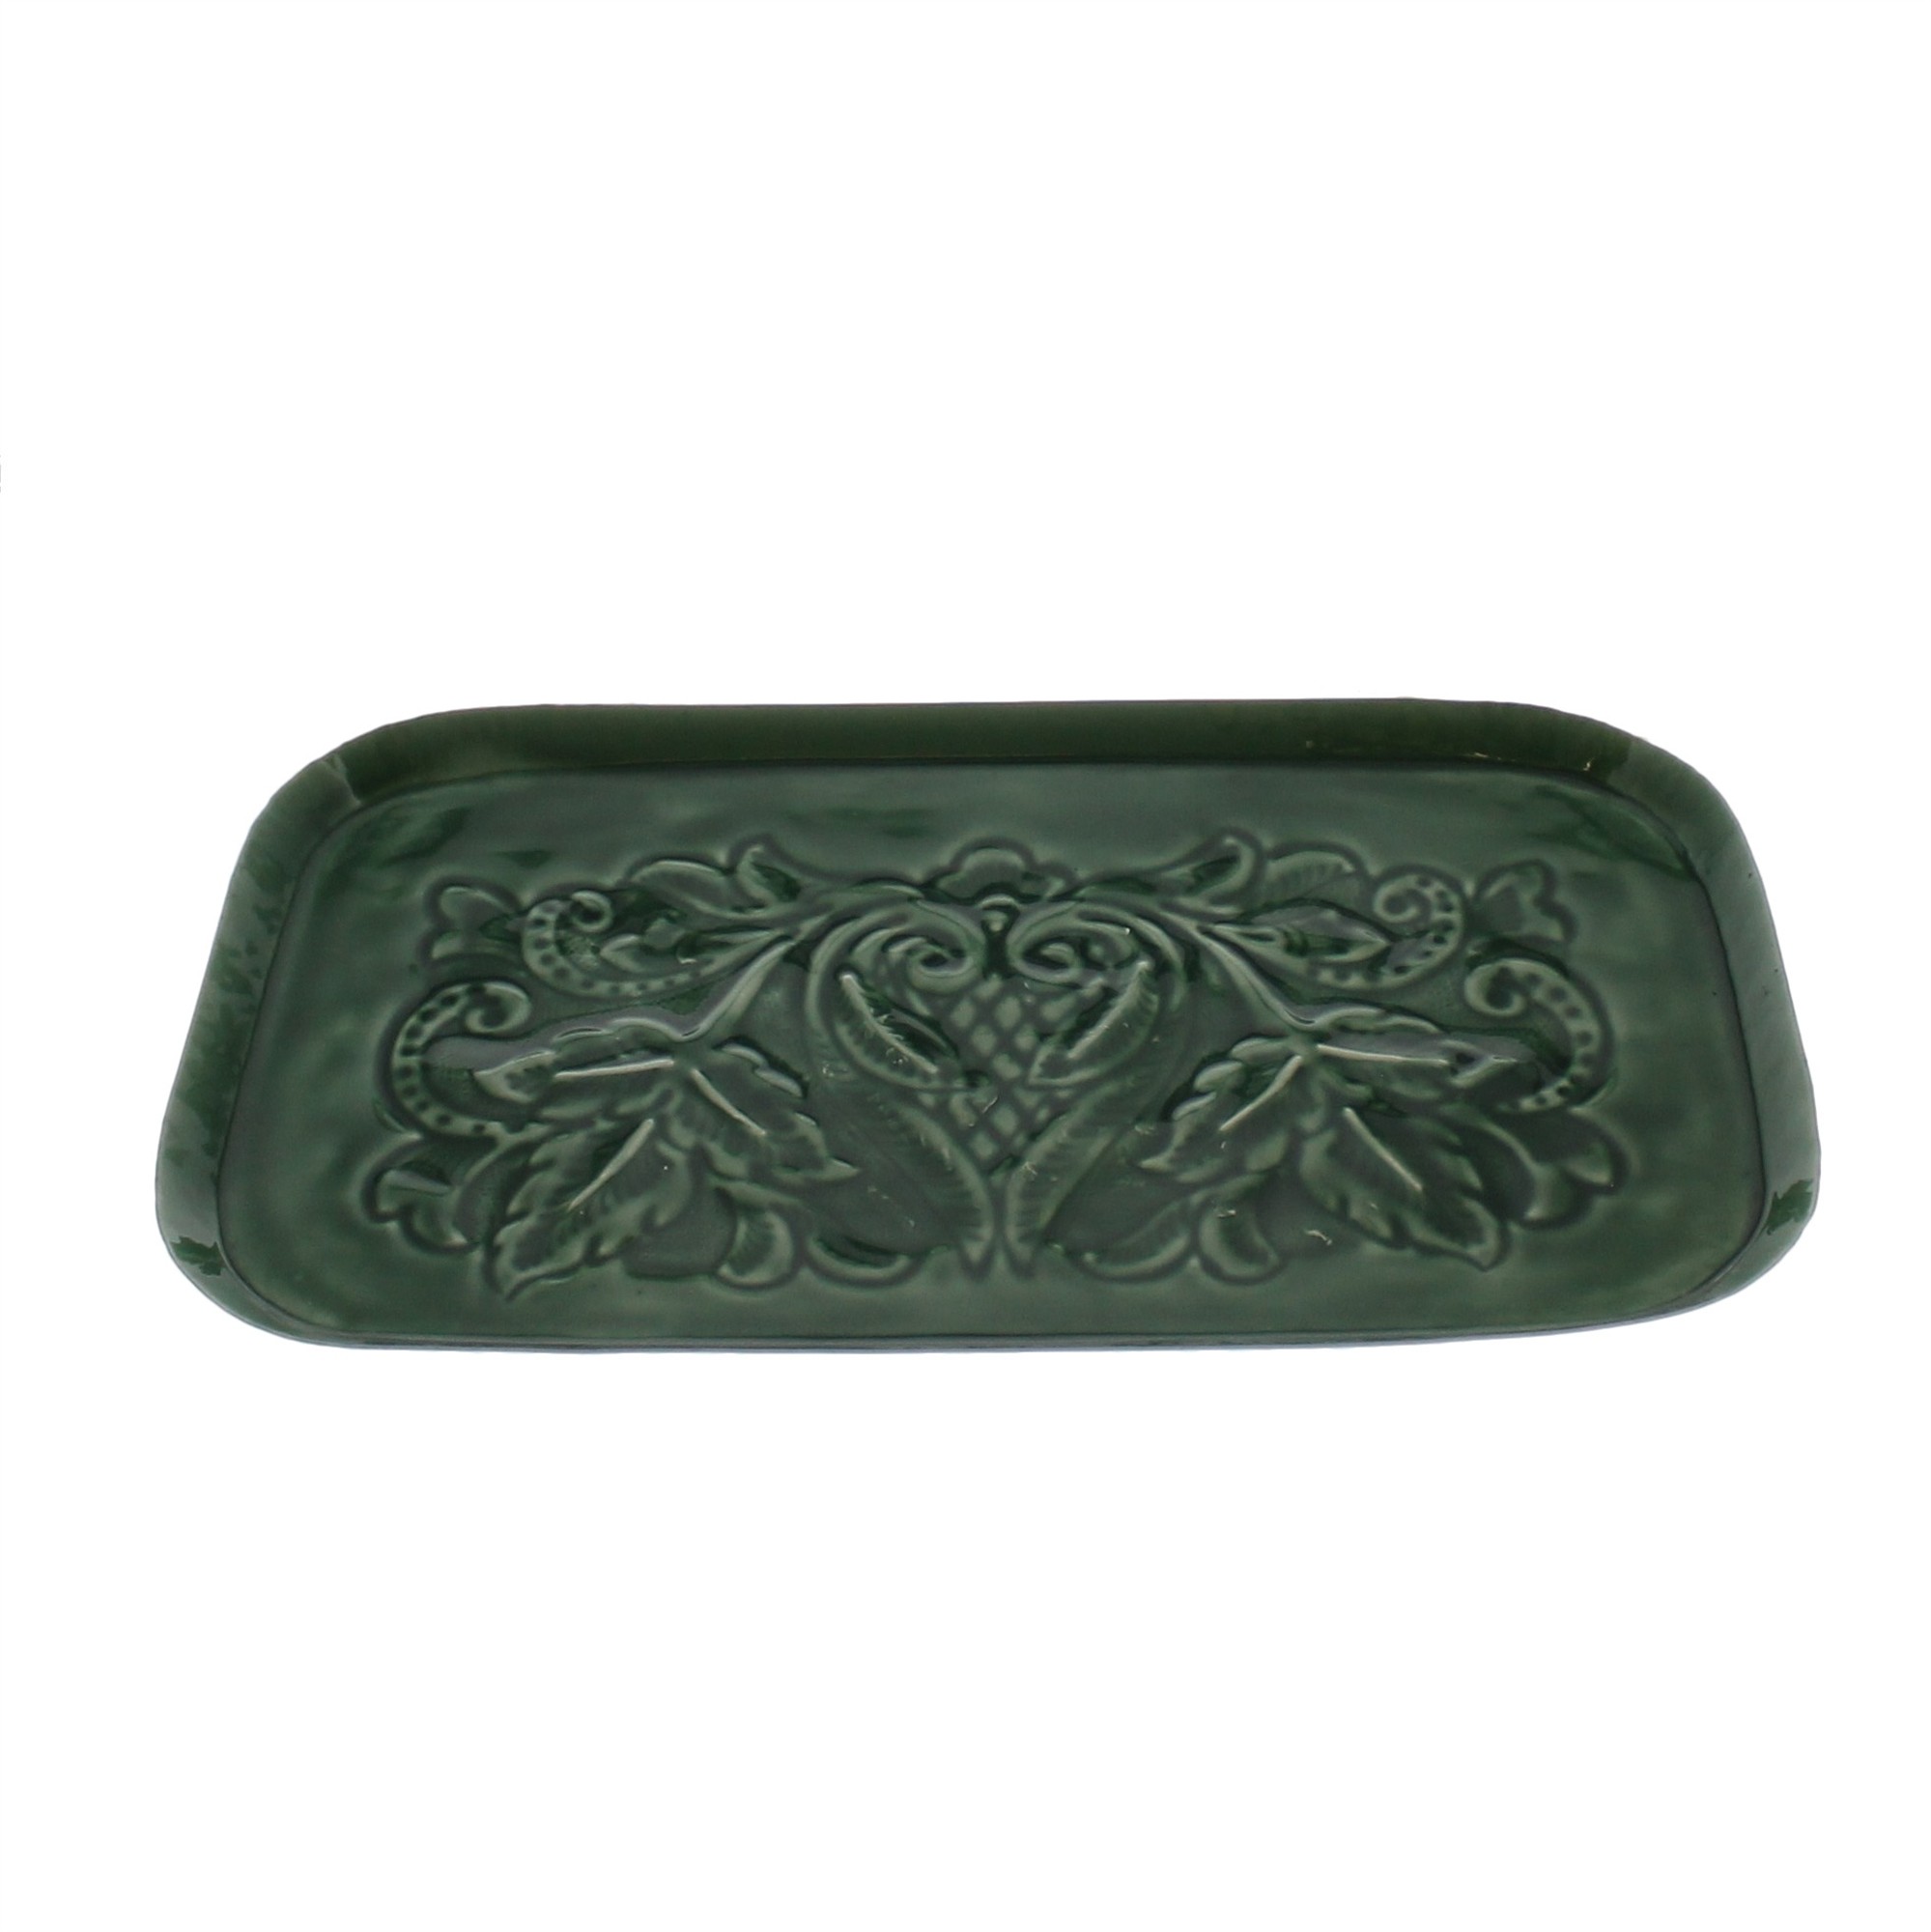 Petite Green Floral Embossed Tray